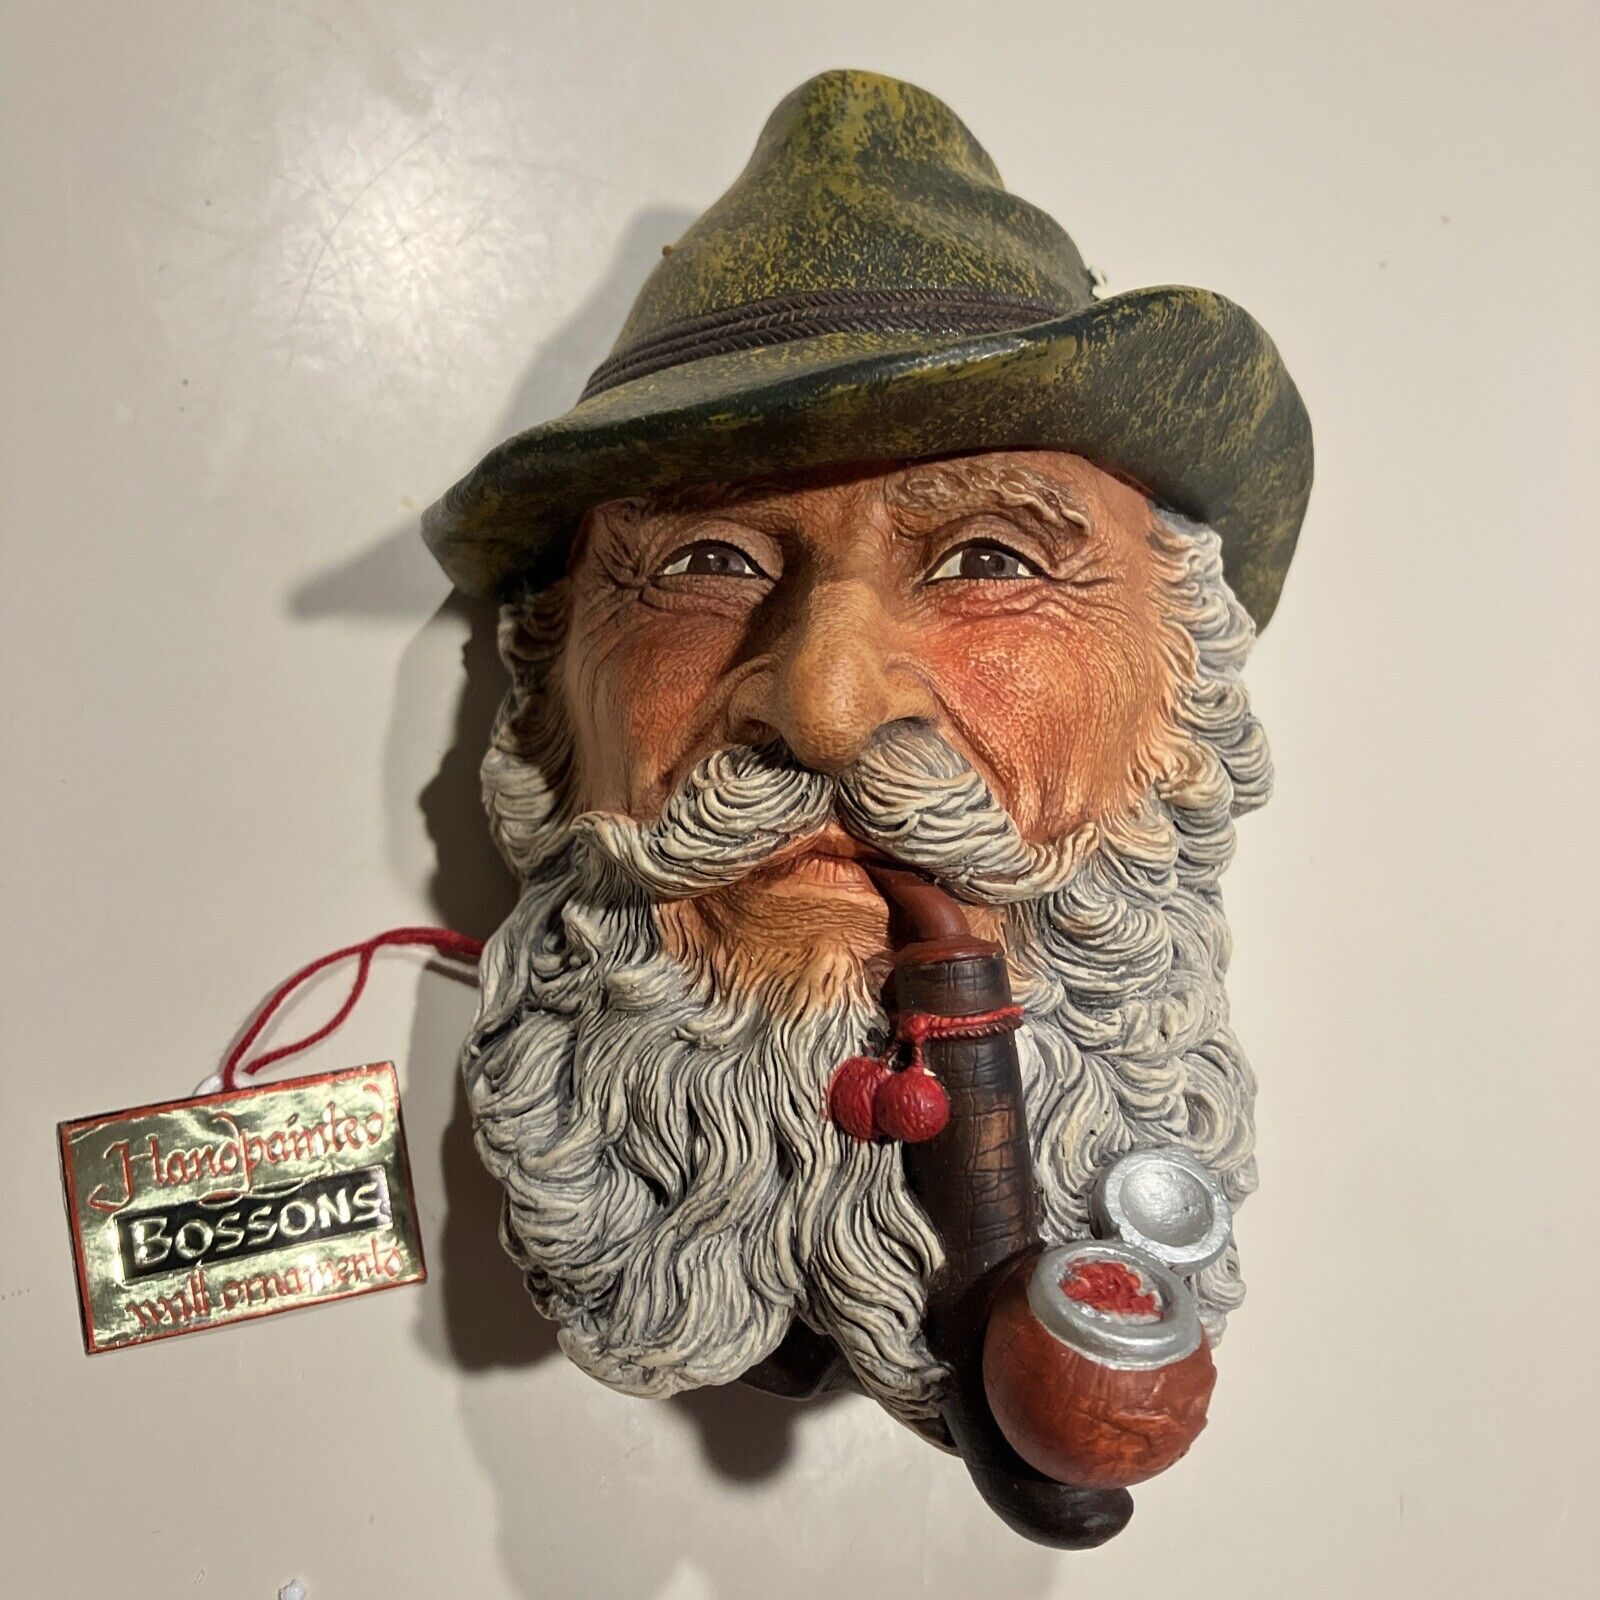 1972 Tyrolean Pipe Bossons Chalkware Ornament Wall Art Decorative Hand Painted